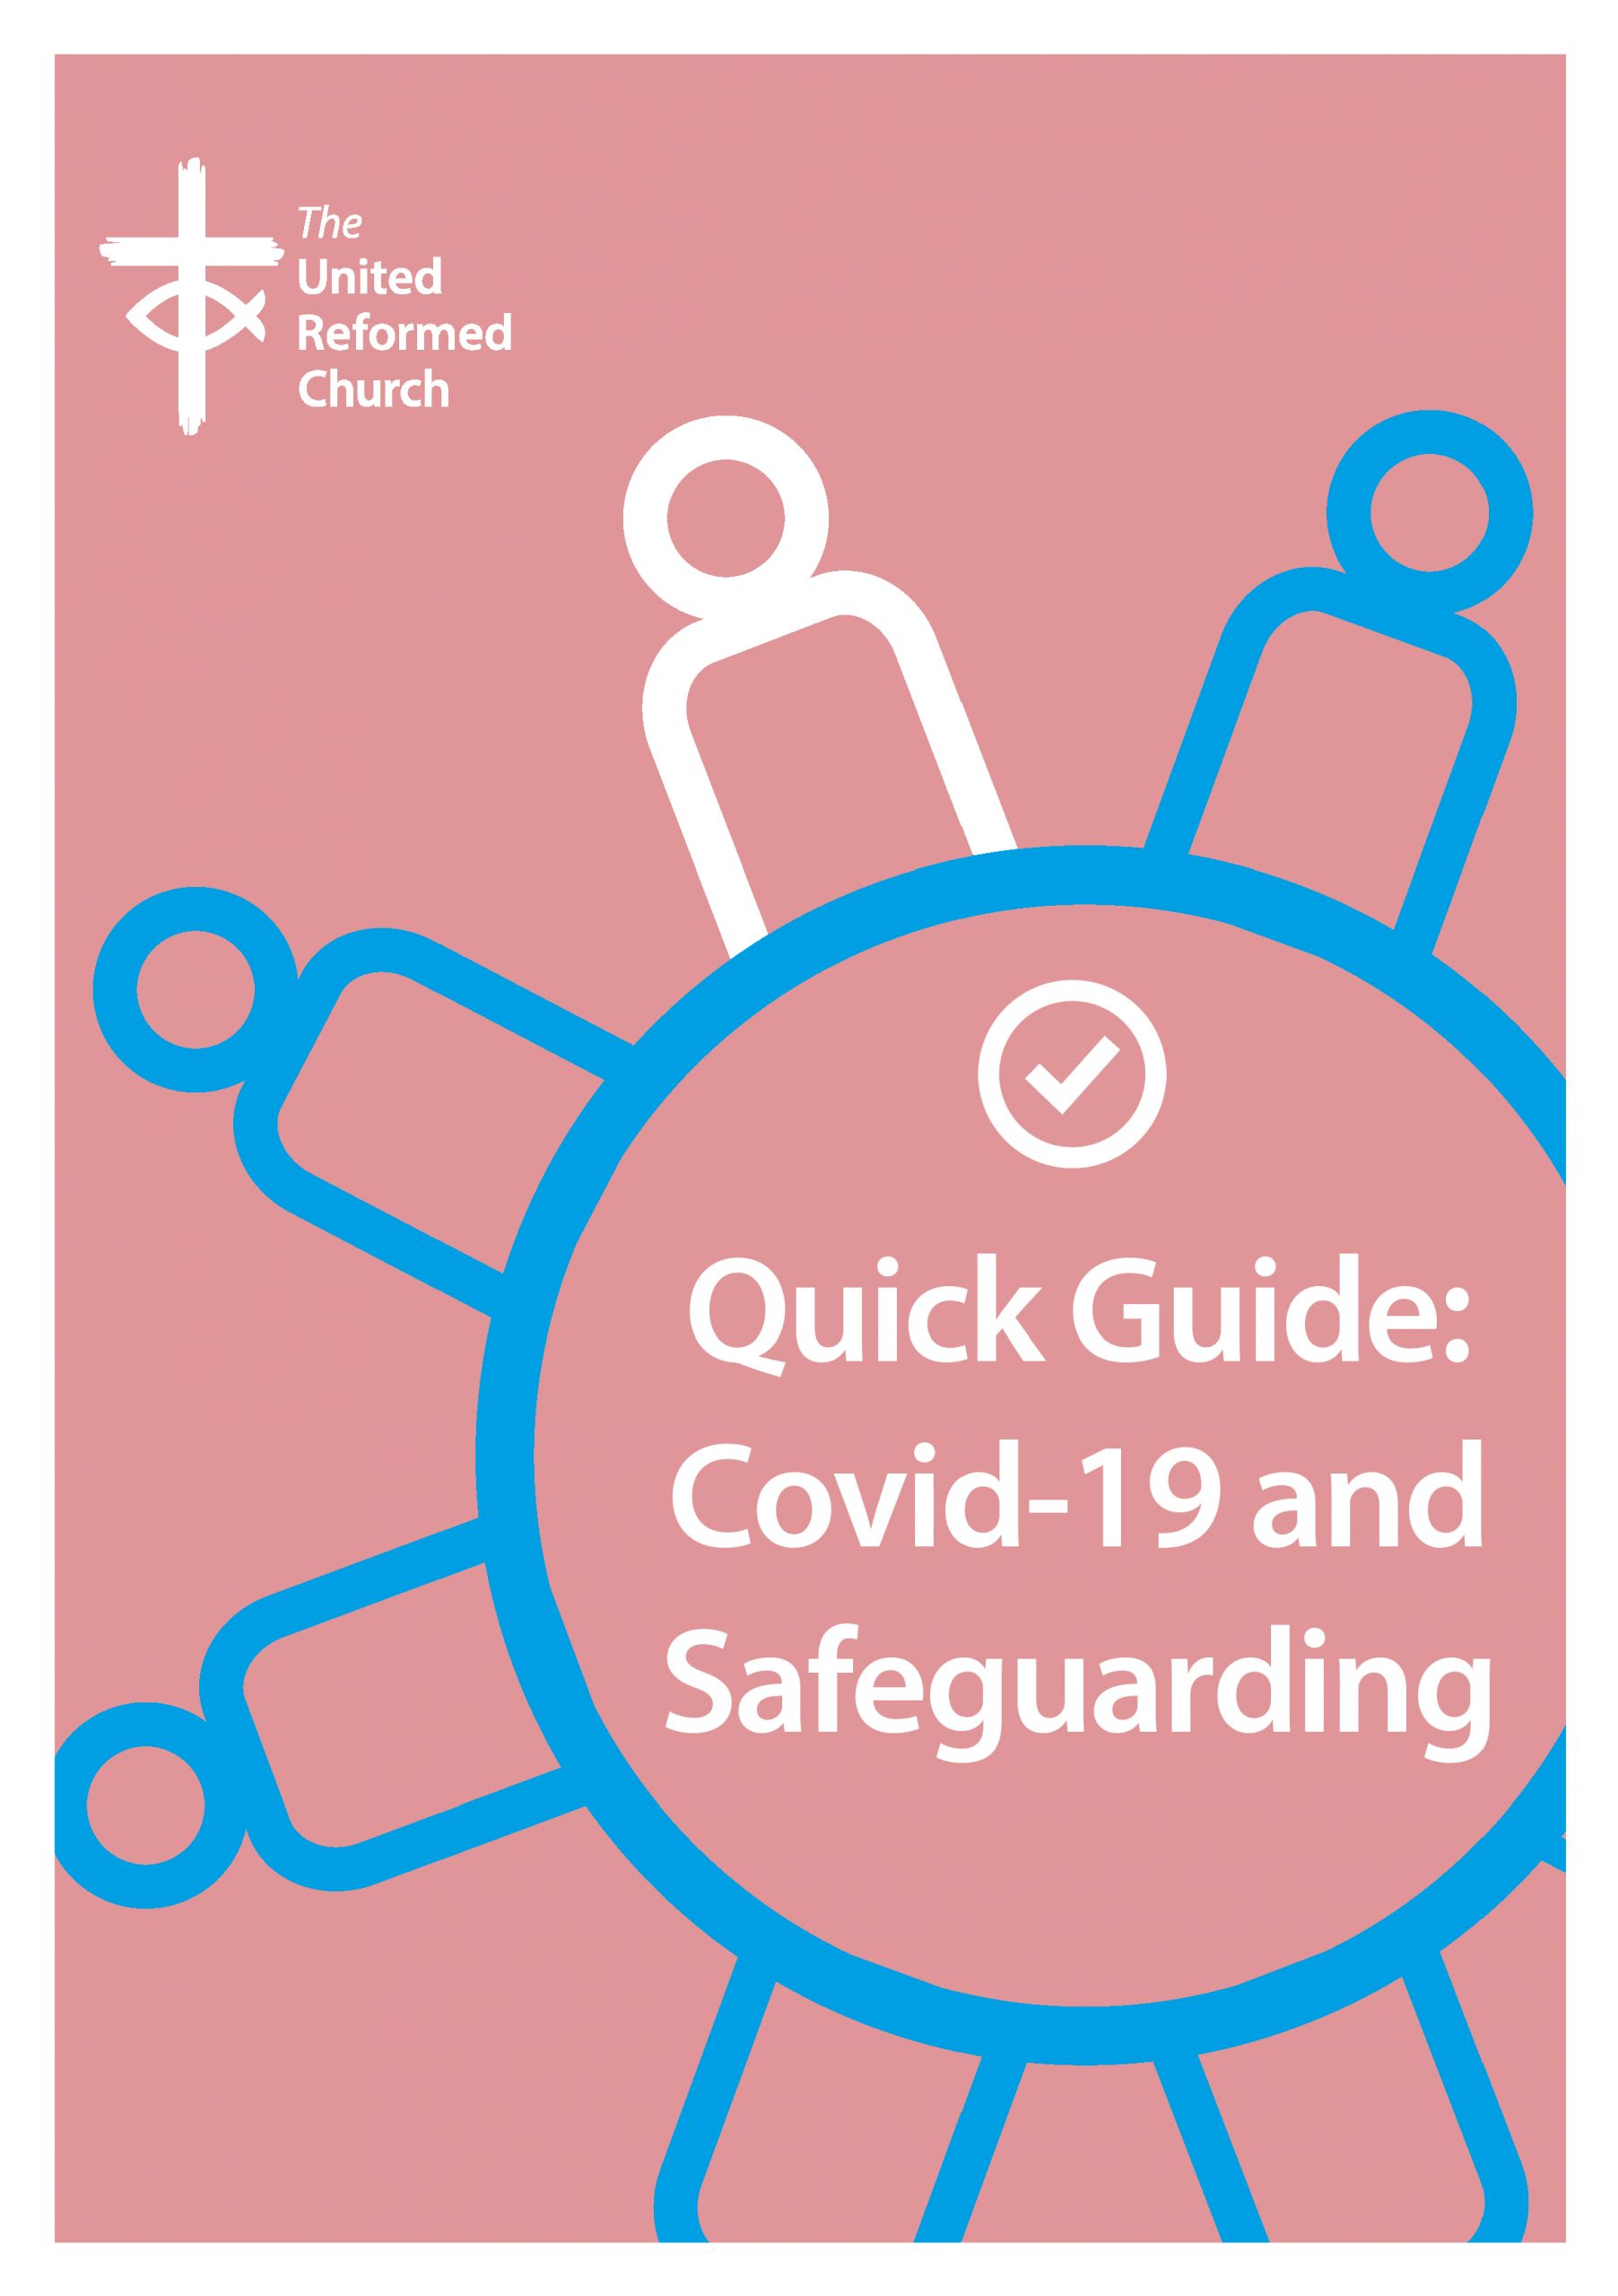 Quick guide: Covid-19 and safeguarding